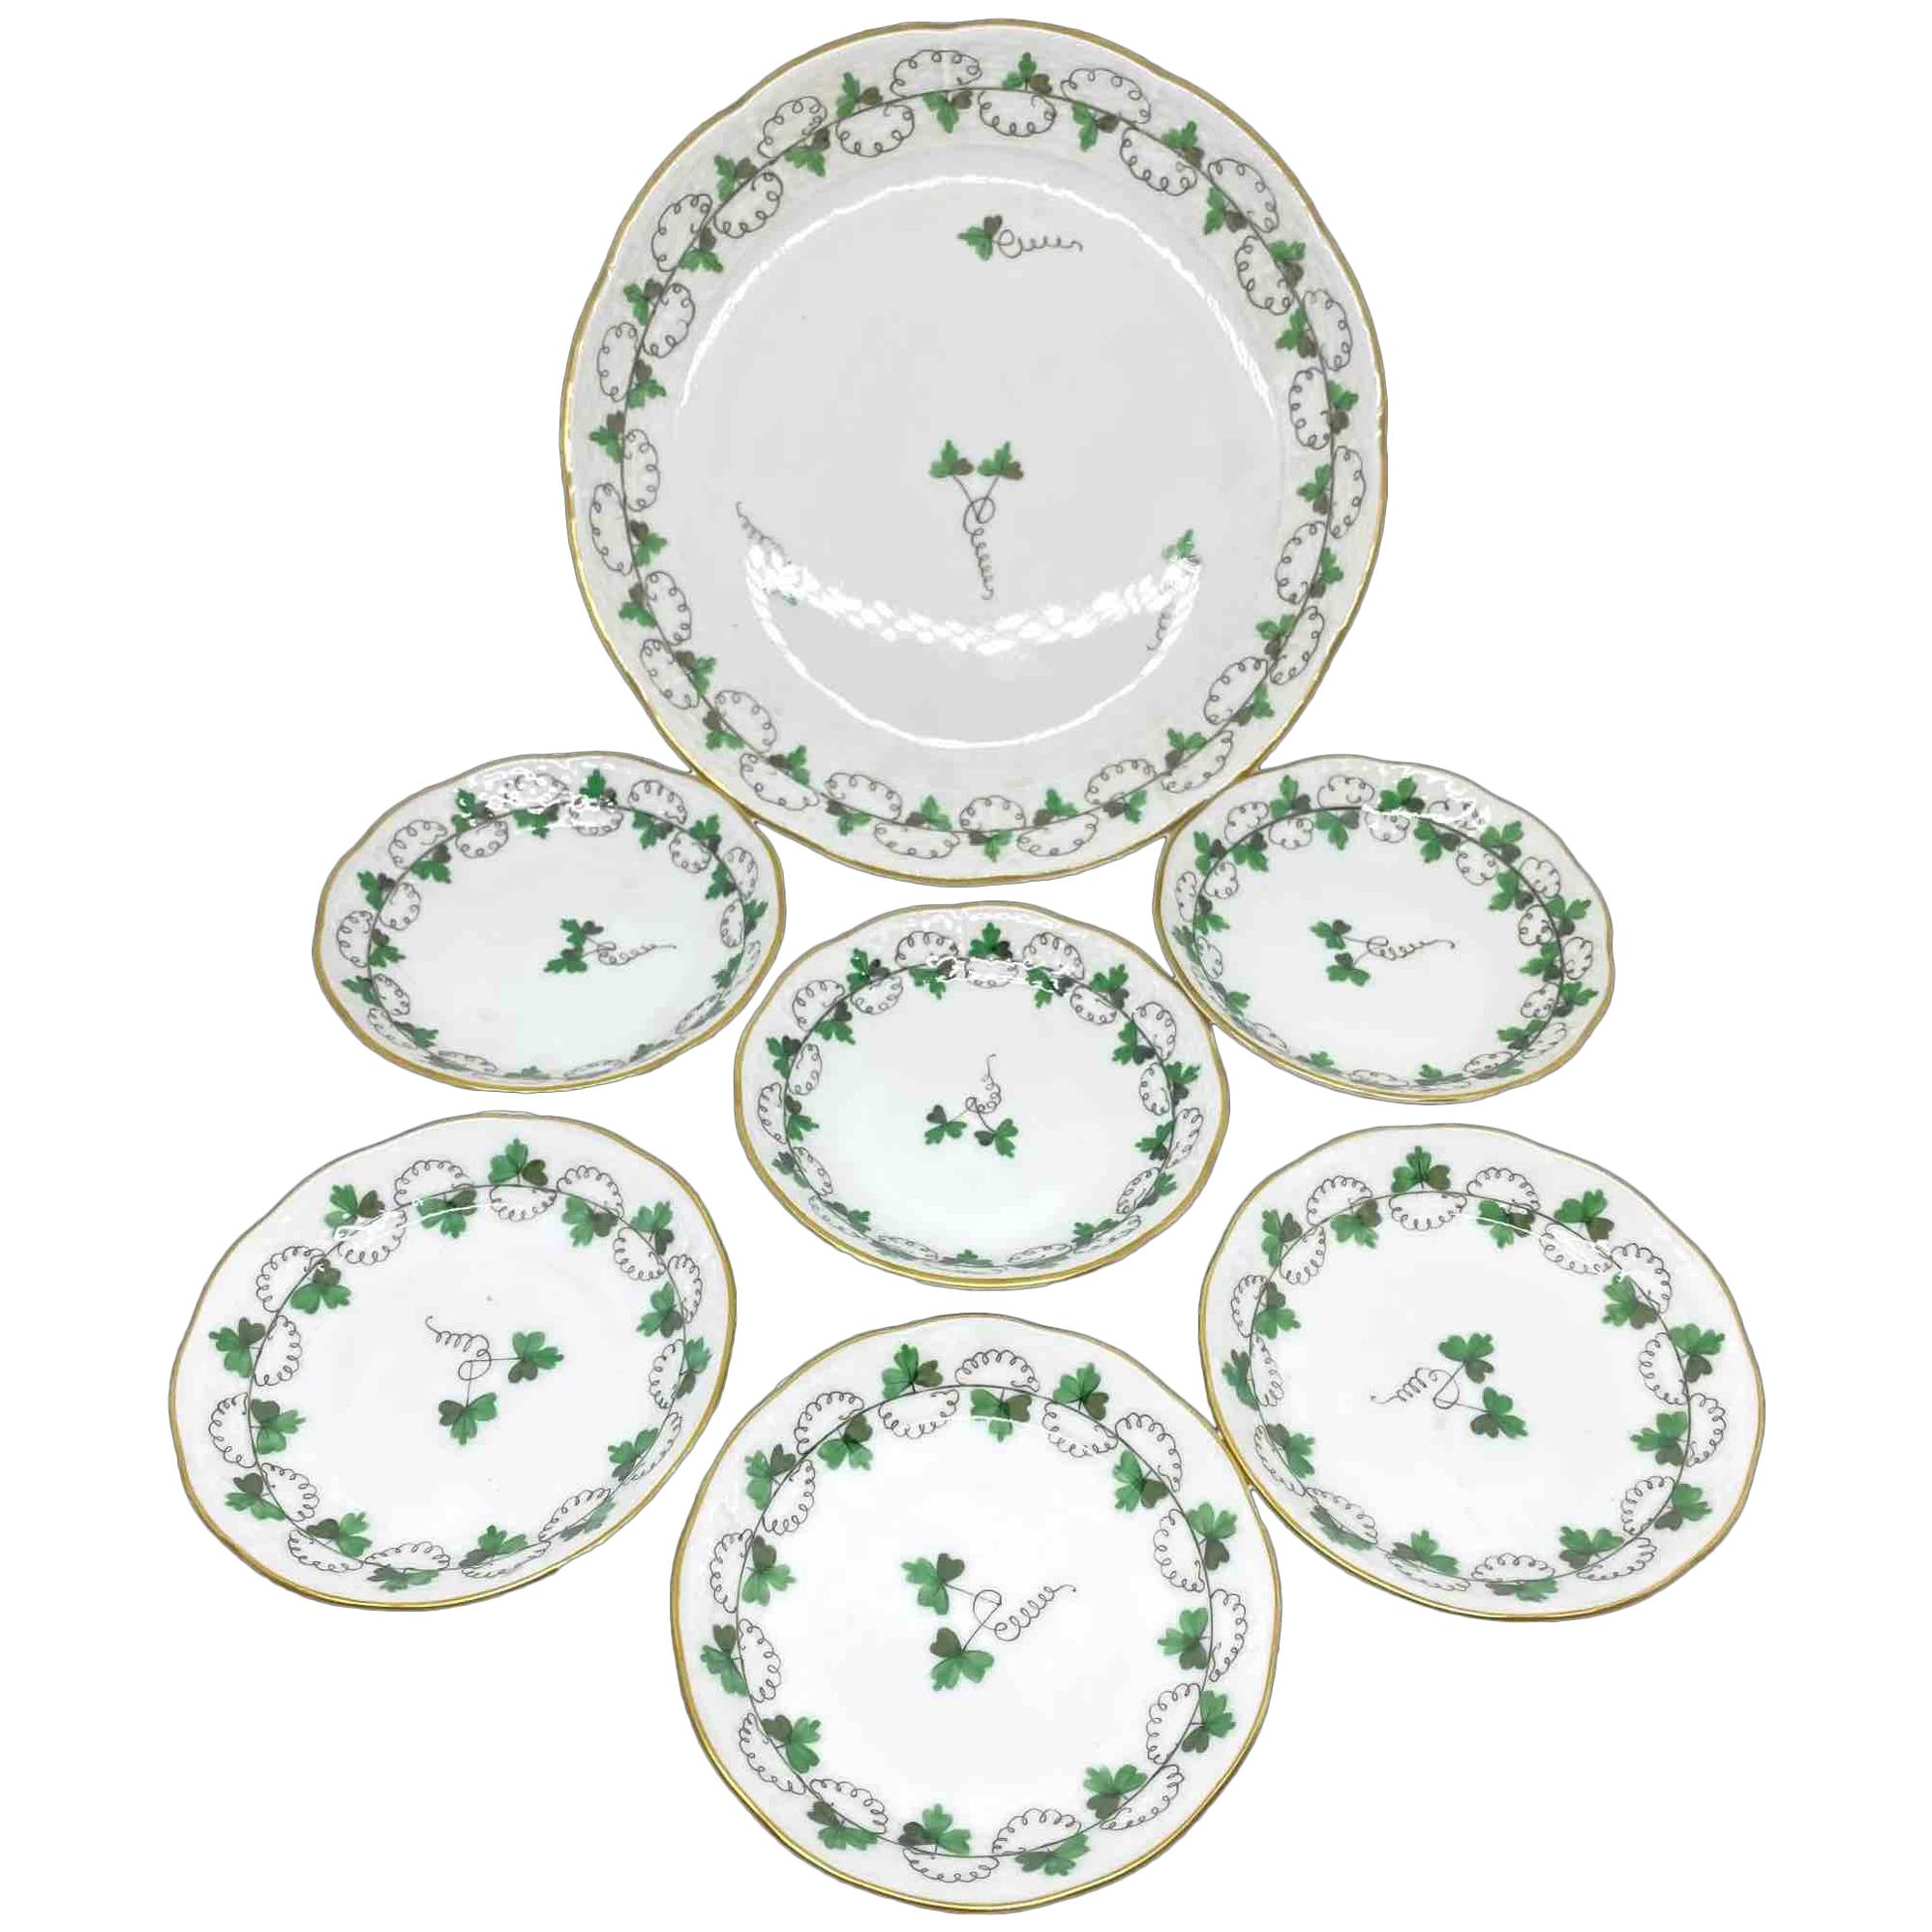 Collection of 7 Plates Herend Hungary Porcelain Wall Decoration Ready to Hang